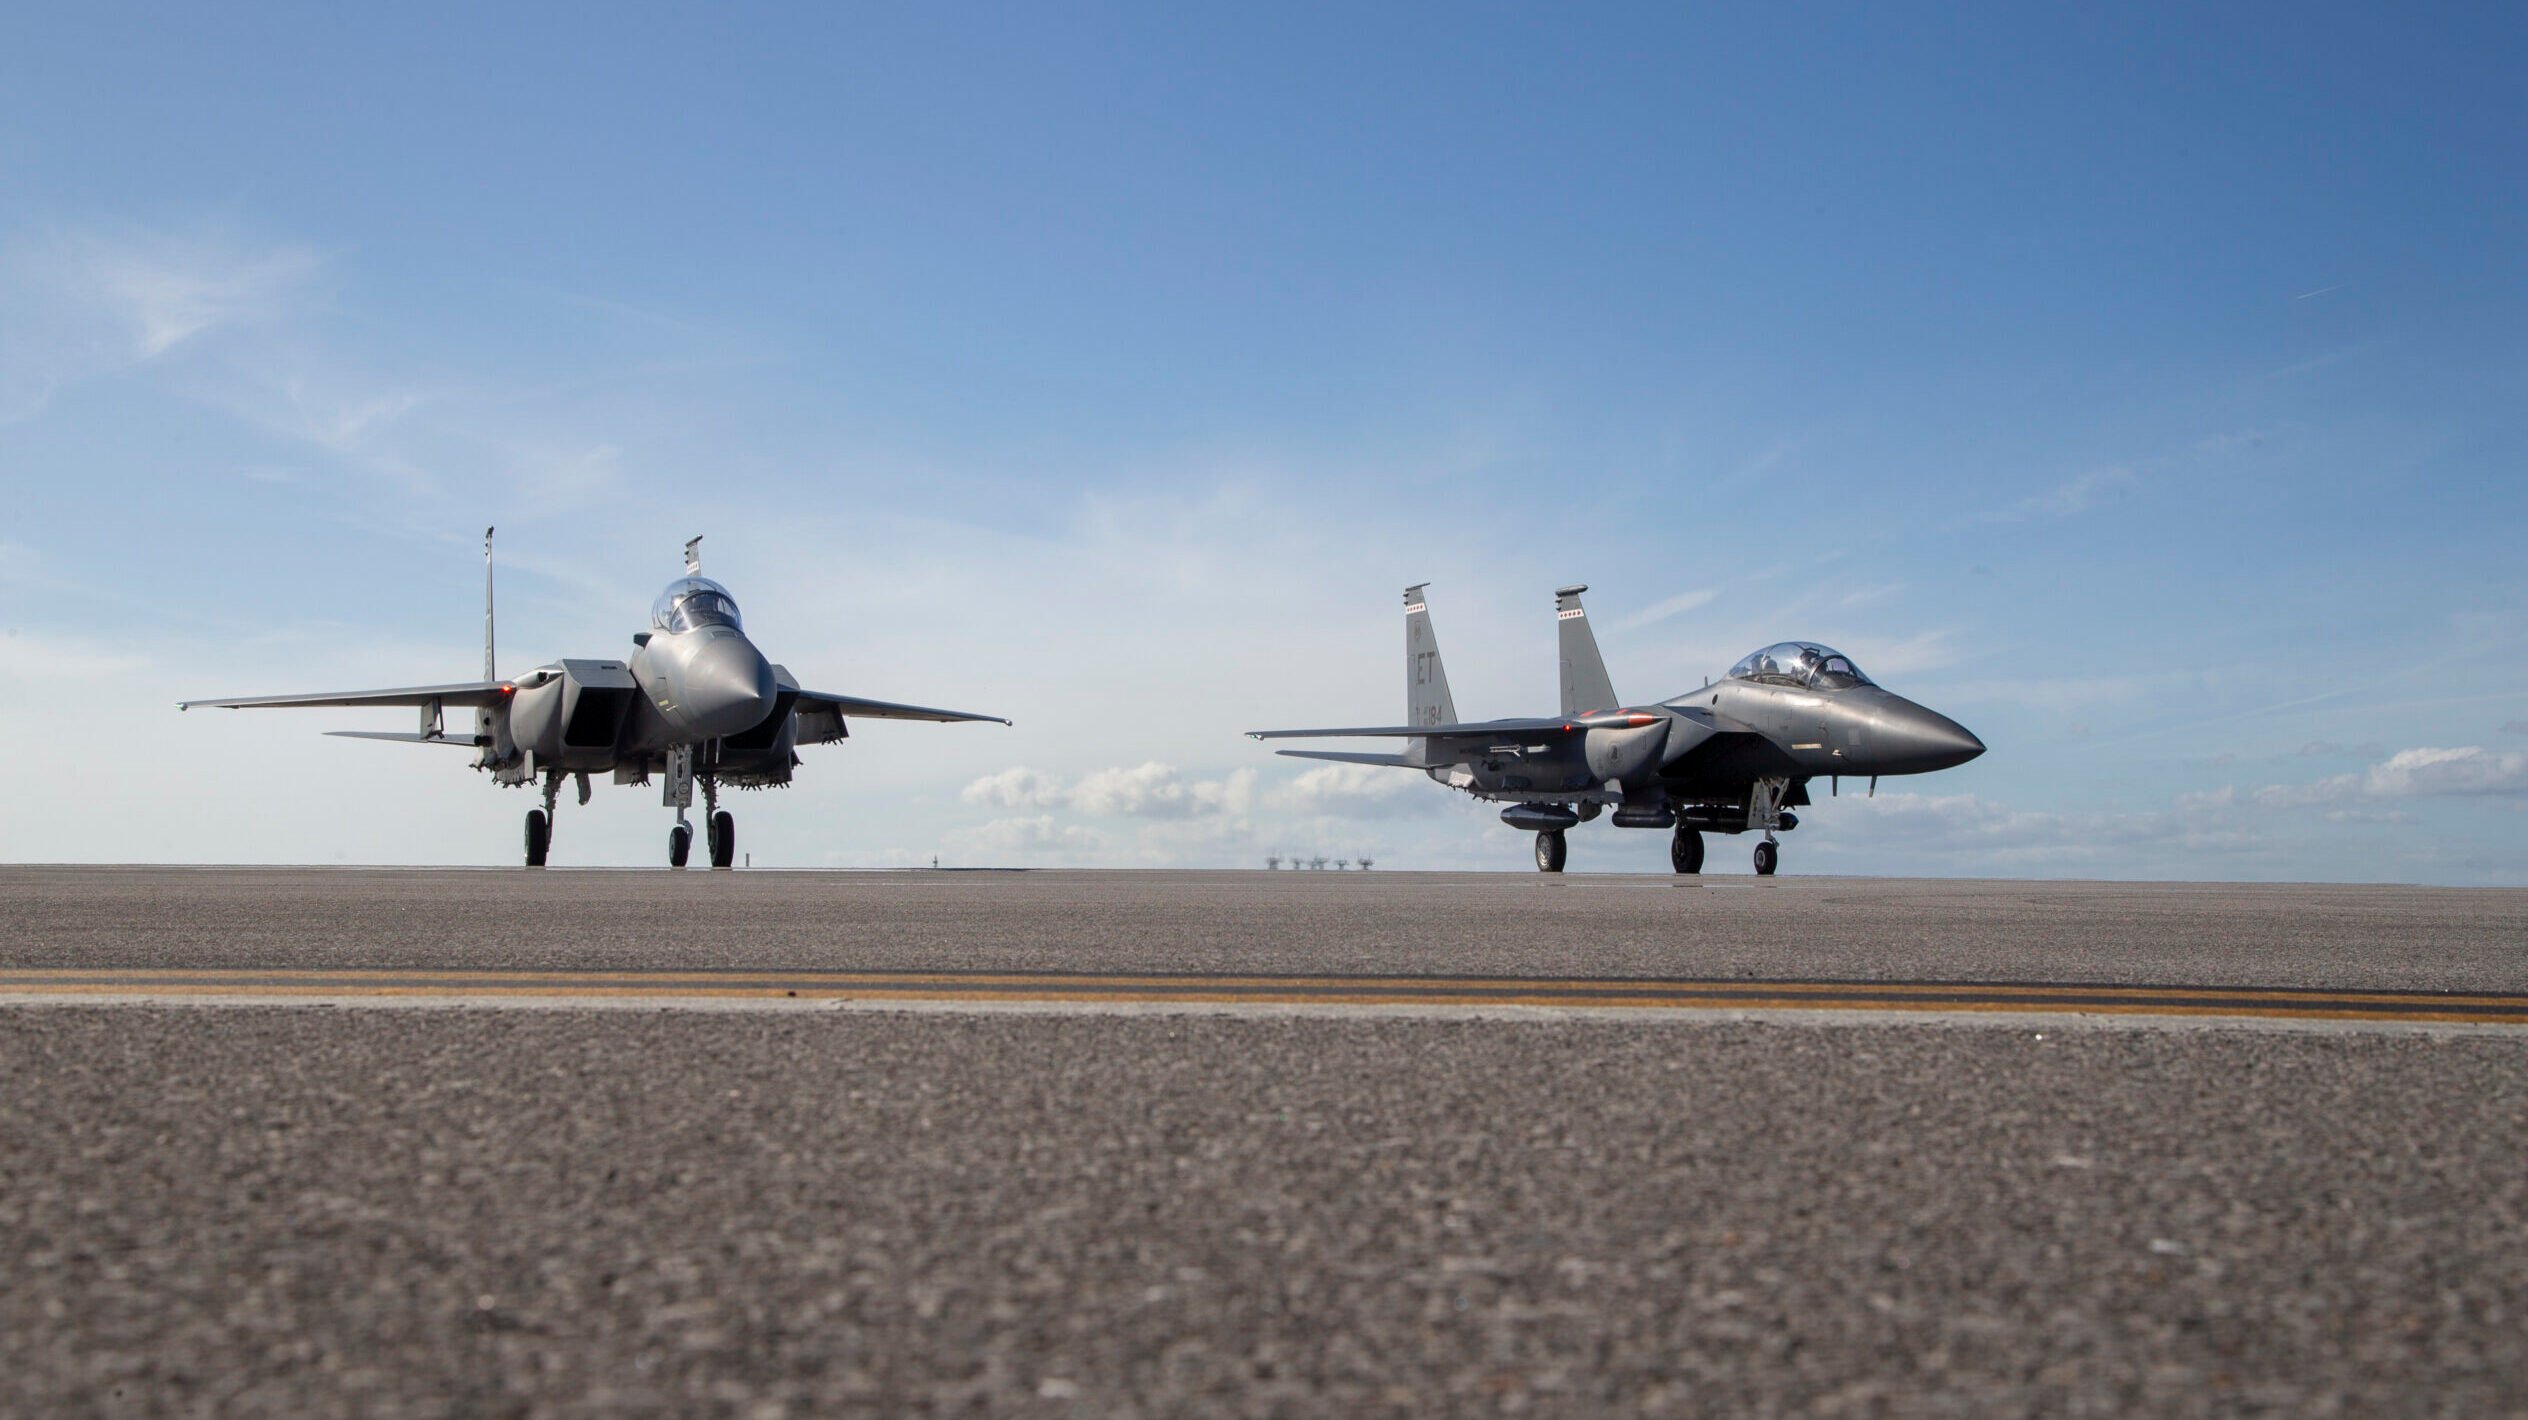 If you feel the need for speed, should you go Navy  or Air Force?